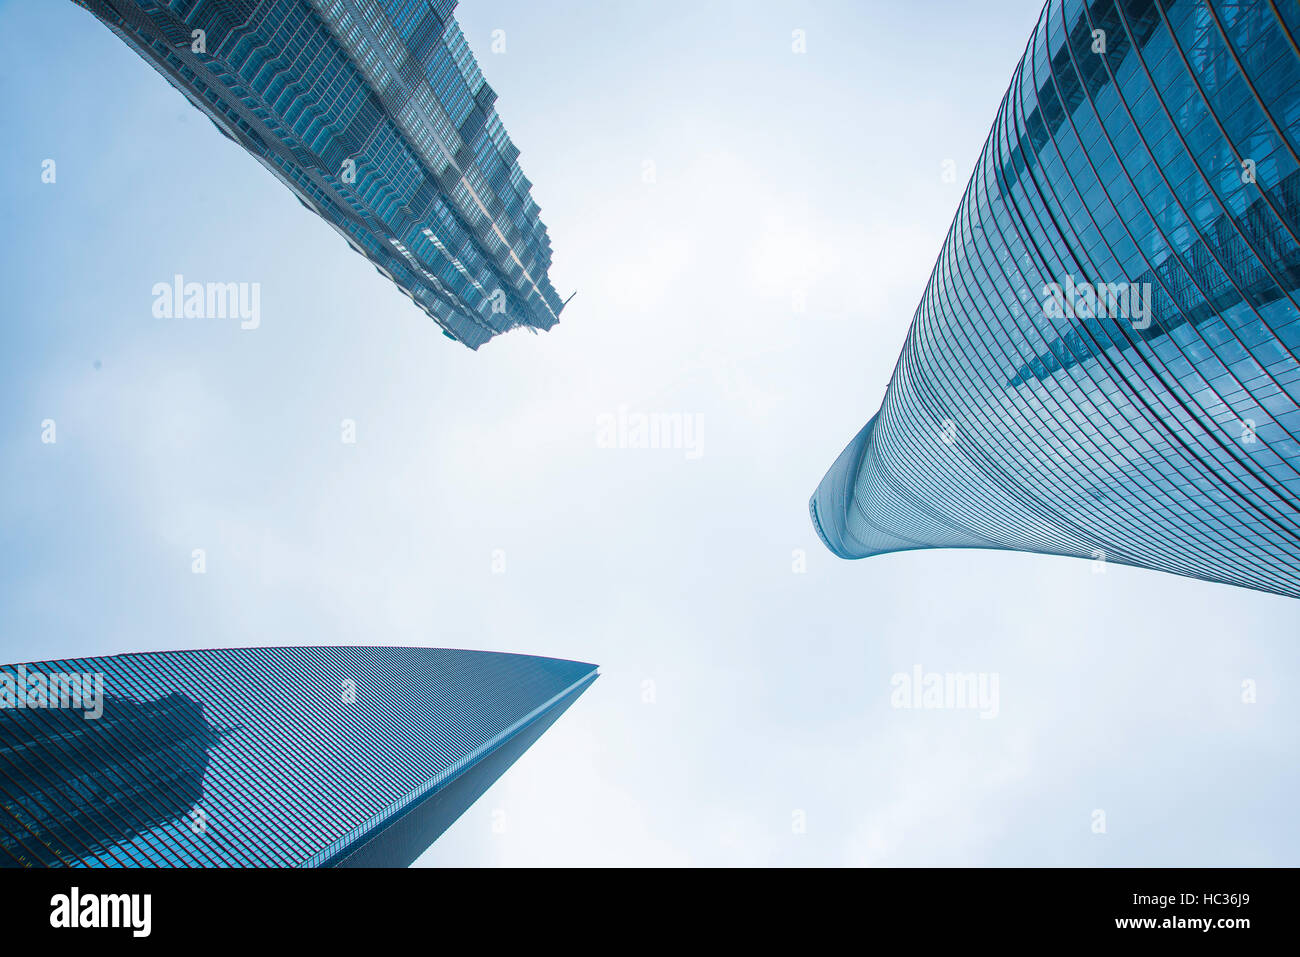 The three towers of Shanghai tallest skyscraper in Pudong commercial center hub. Stock Photo